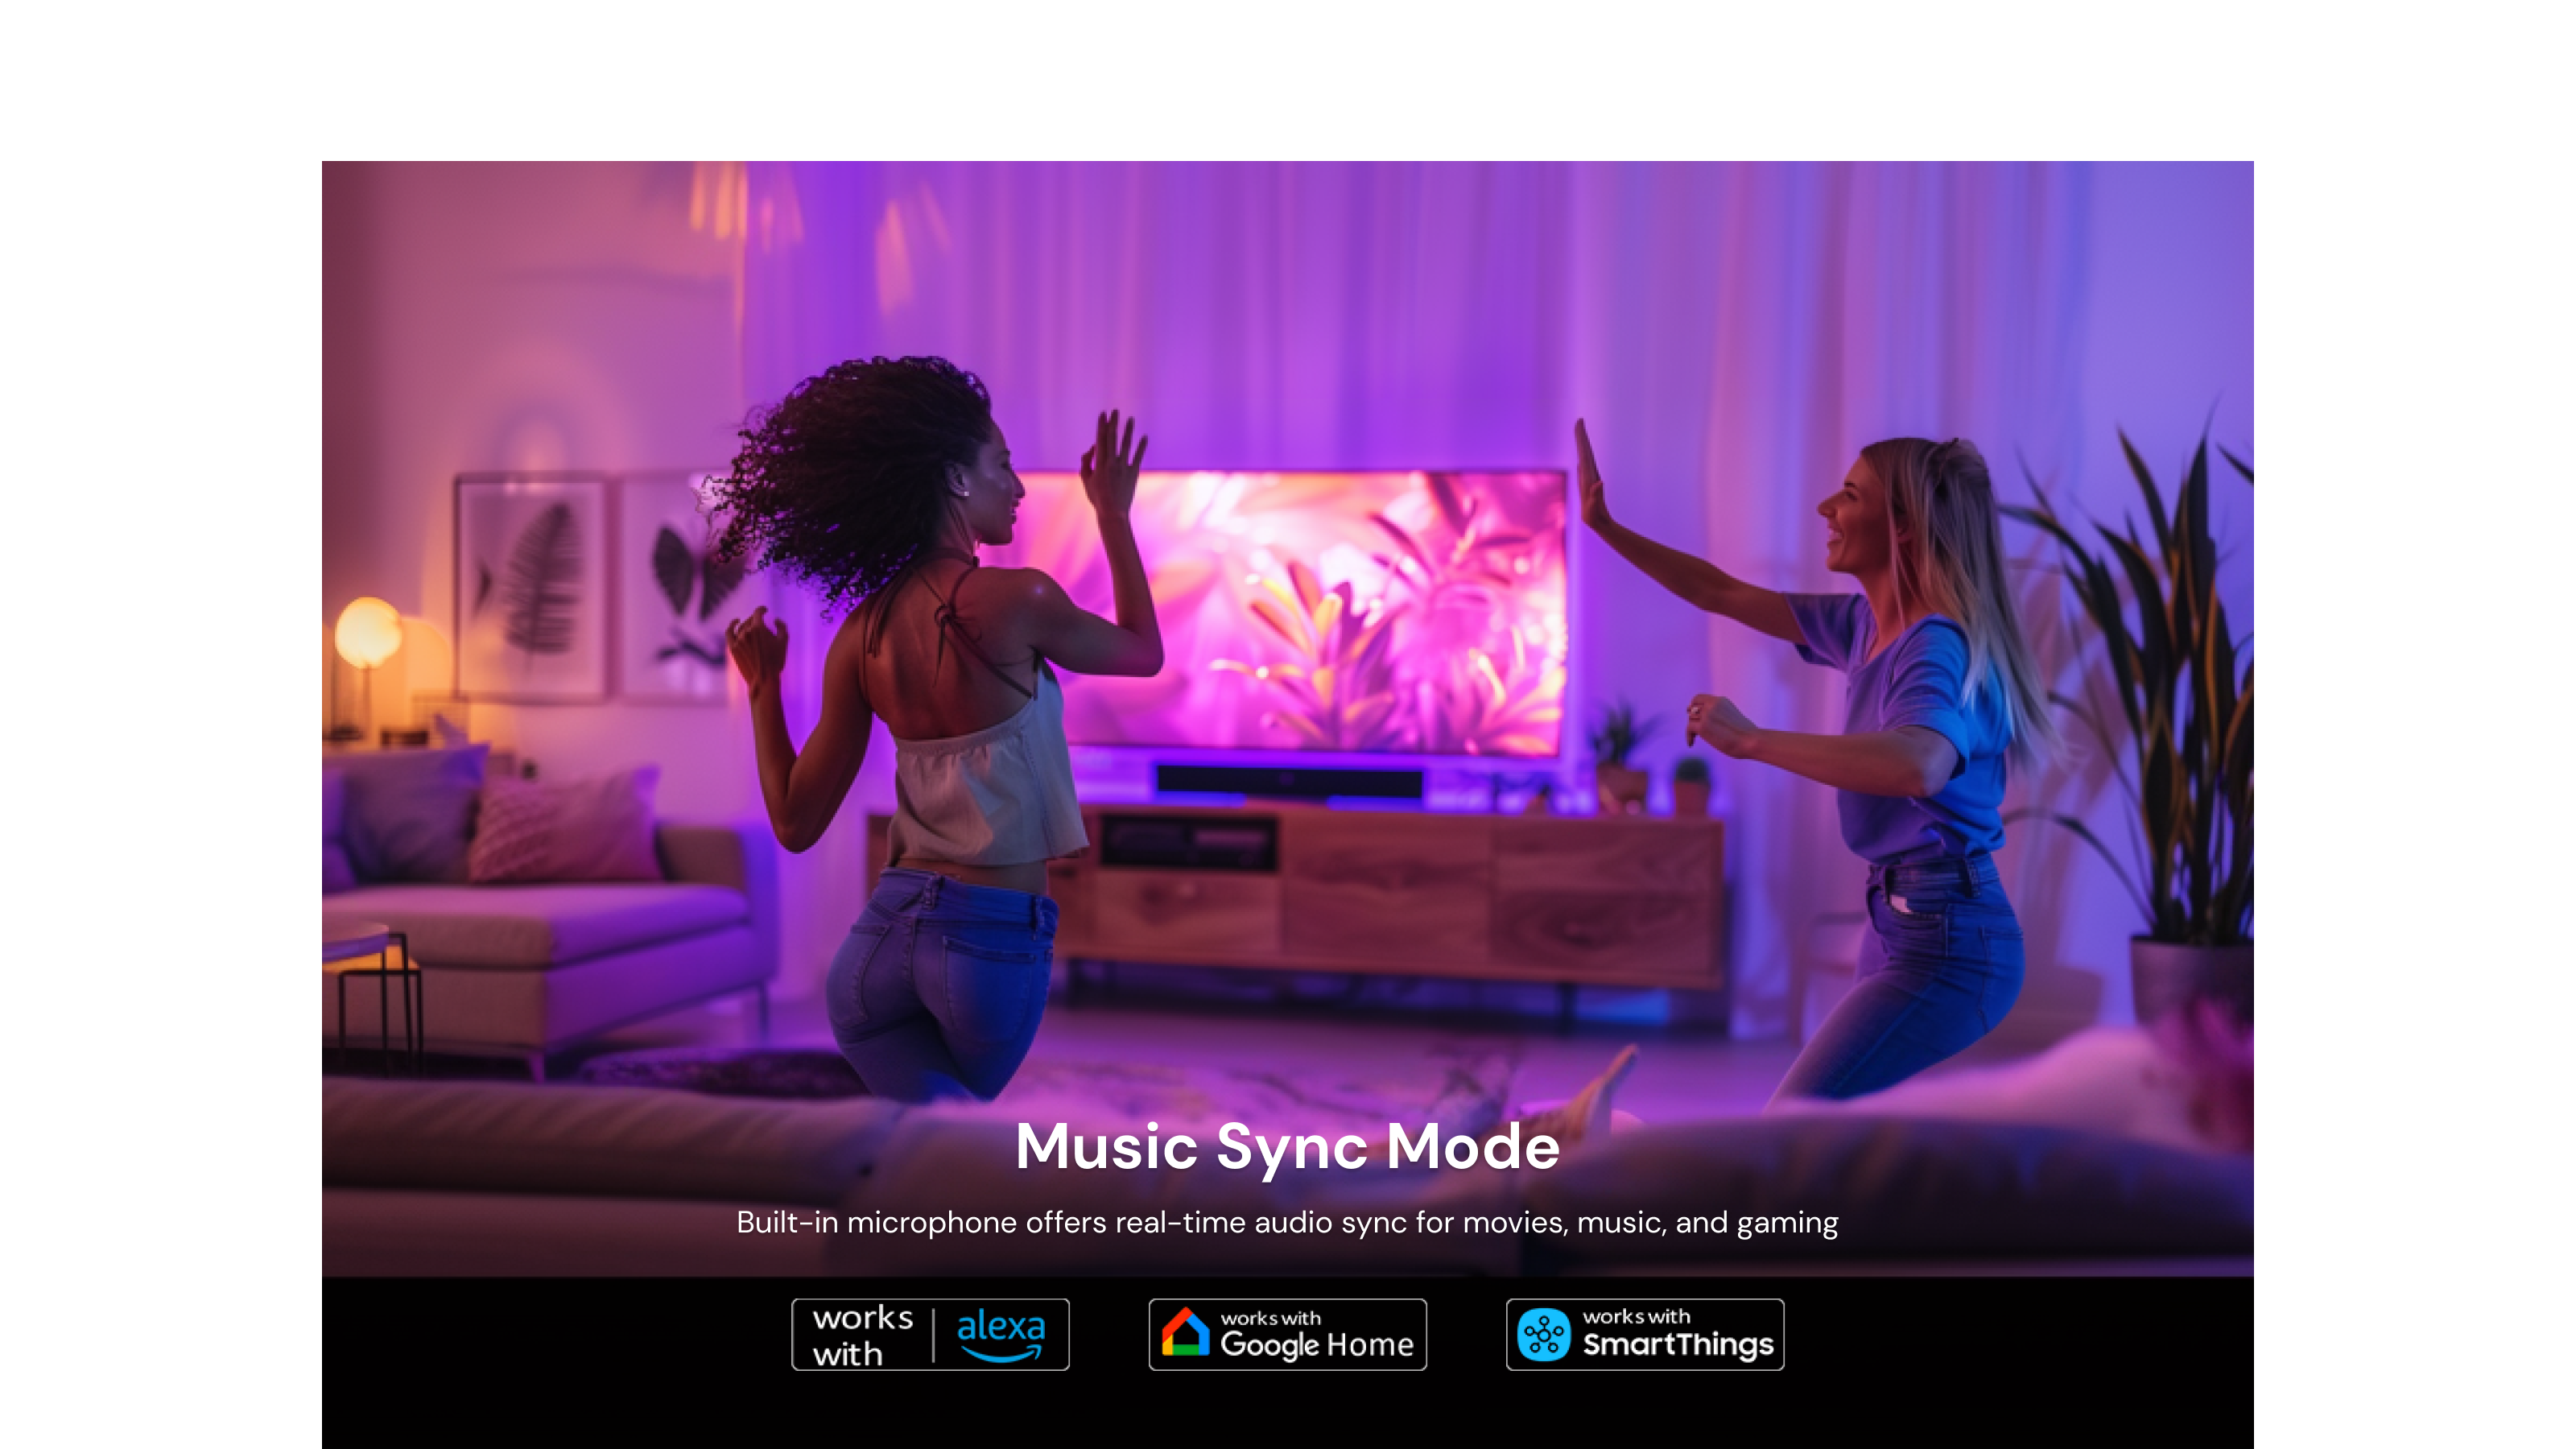 Dynamic Light Effects: Built-in high sensitivity microphone offers dynamic audio sync, multi-mode support such as Movies, Games, and Music, smoothly sync swith your music or ambient sound from TV/PC and enhance entertainment experience with vibrant lighting.